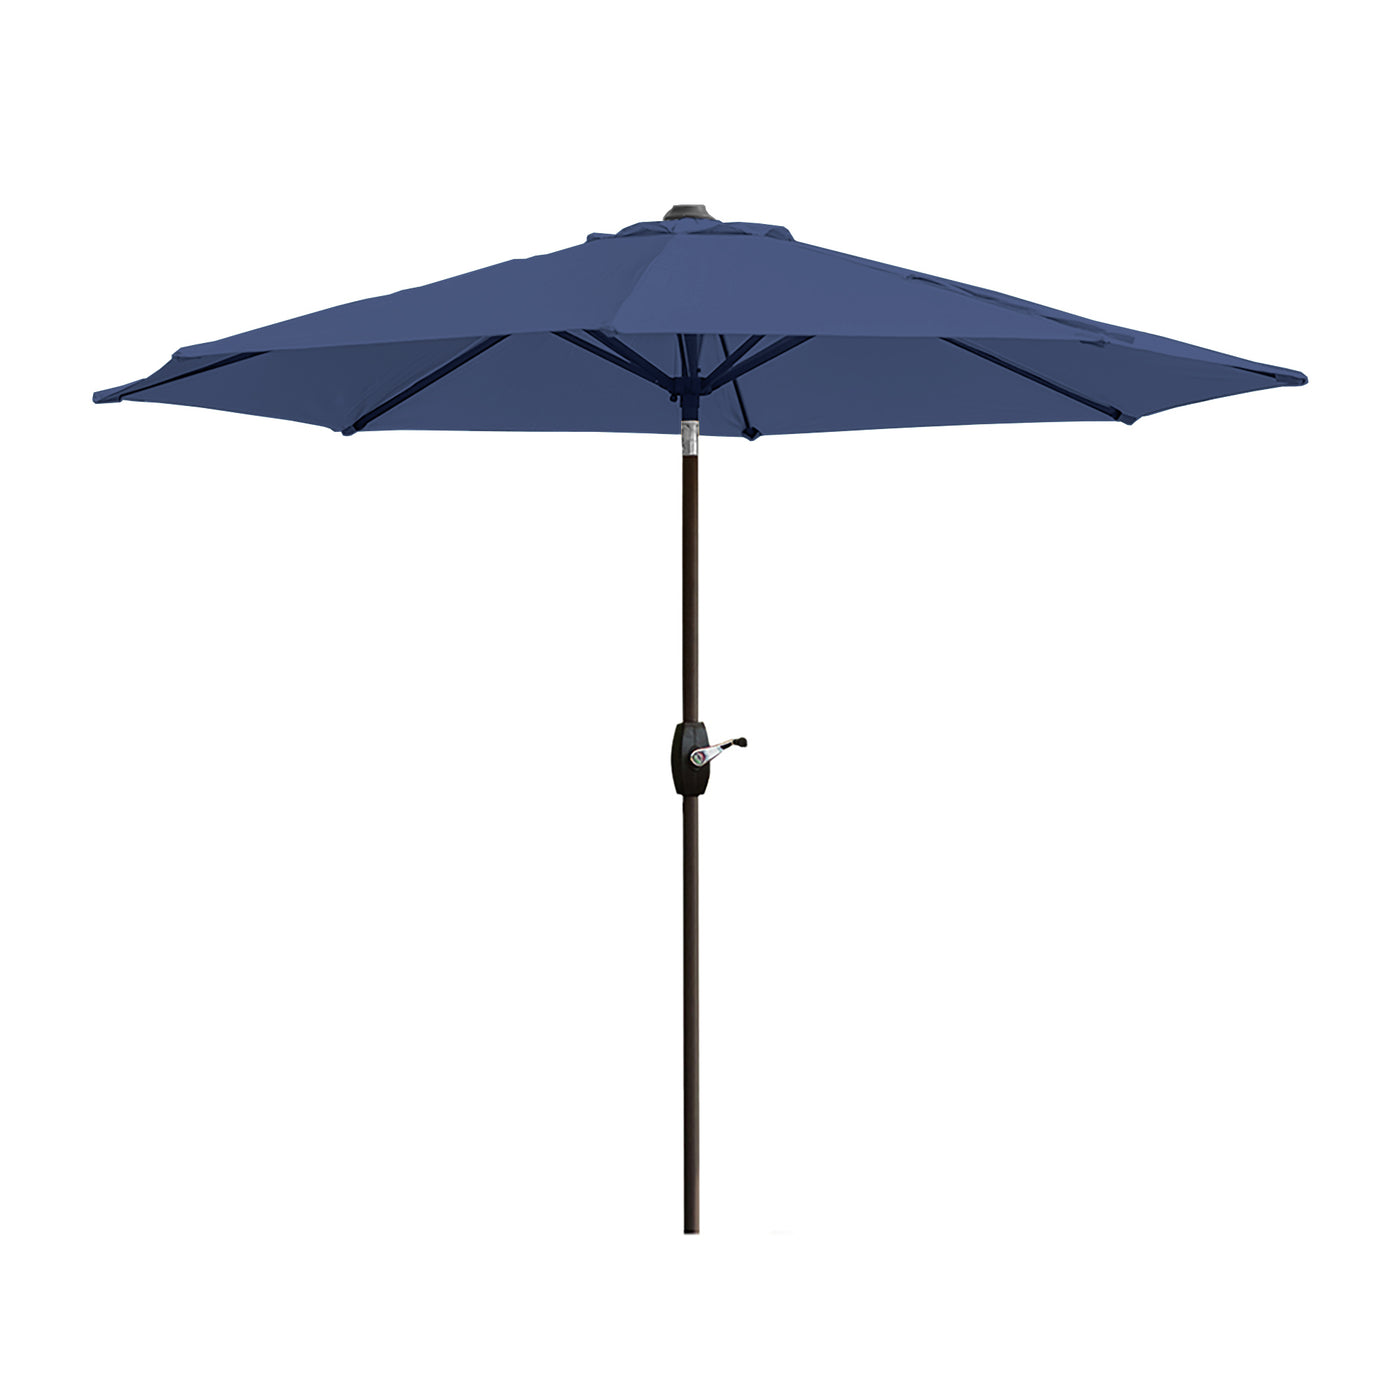 Paolo 9 ft. Patio Umbrella with Bronze Round Weight Base Kit